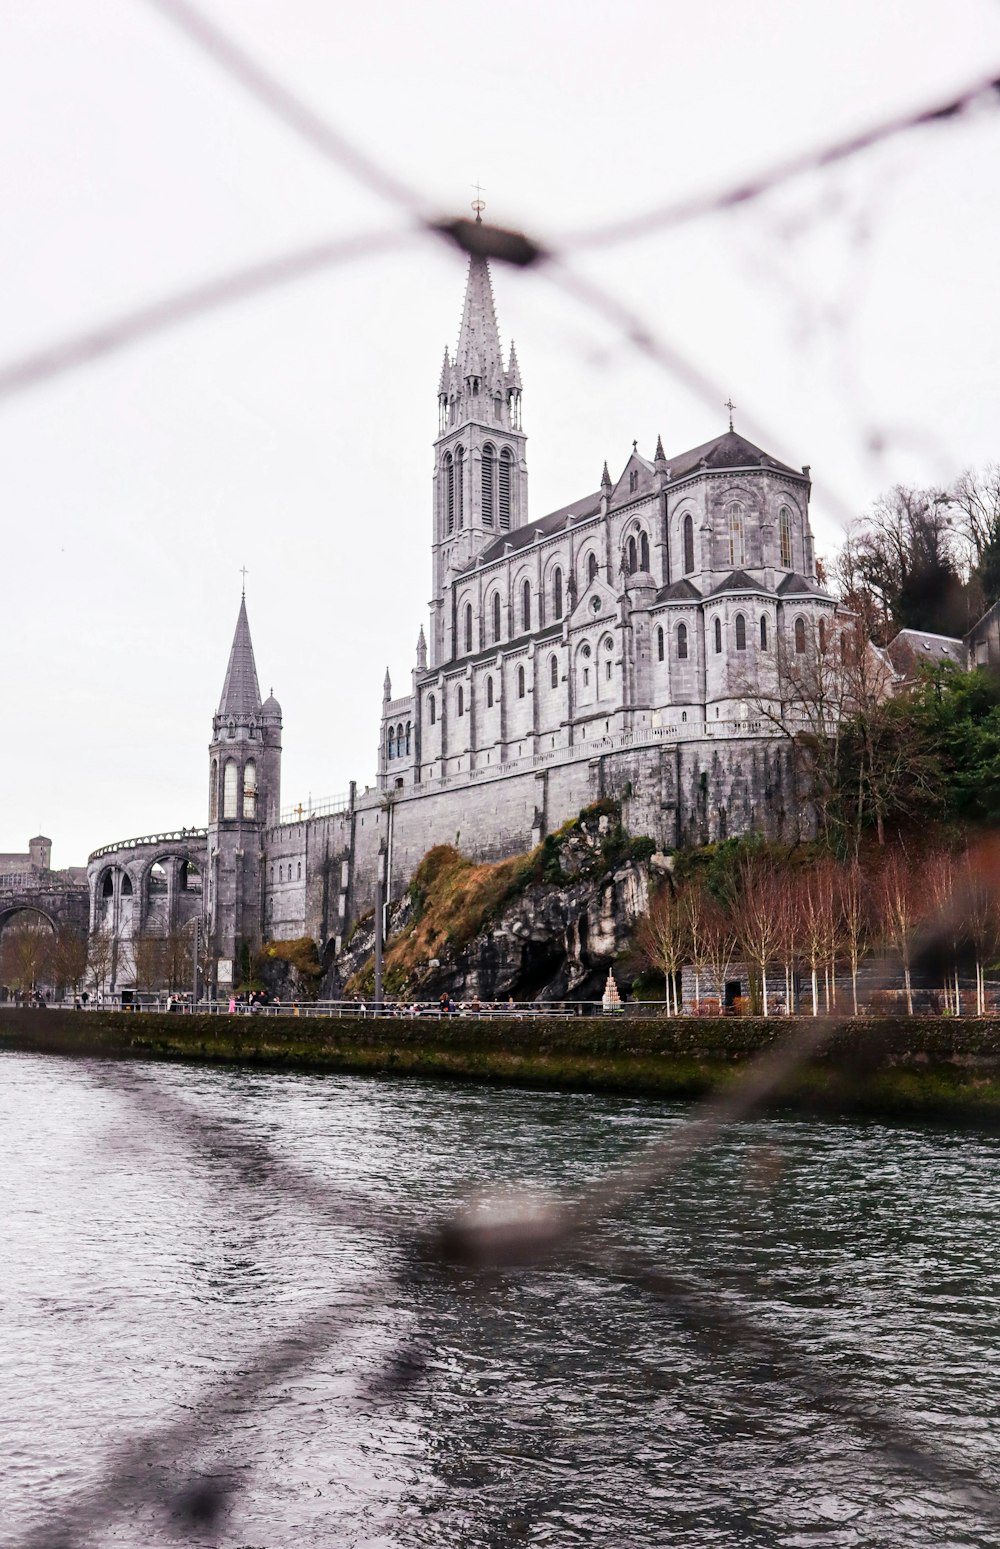 a view of a cathedral from across a river